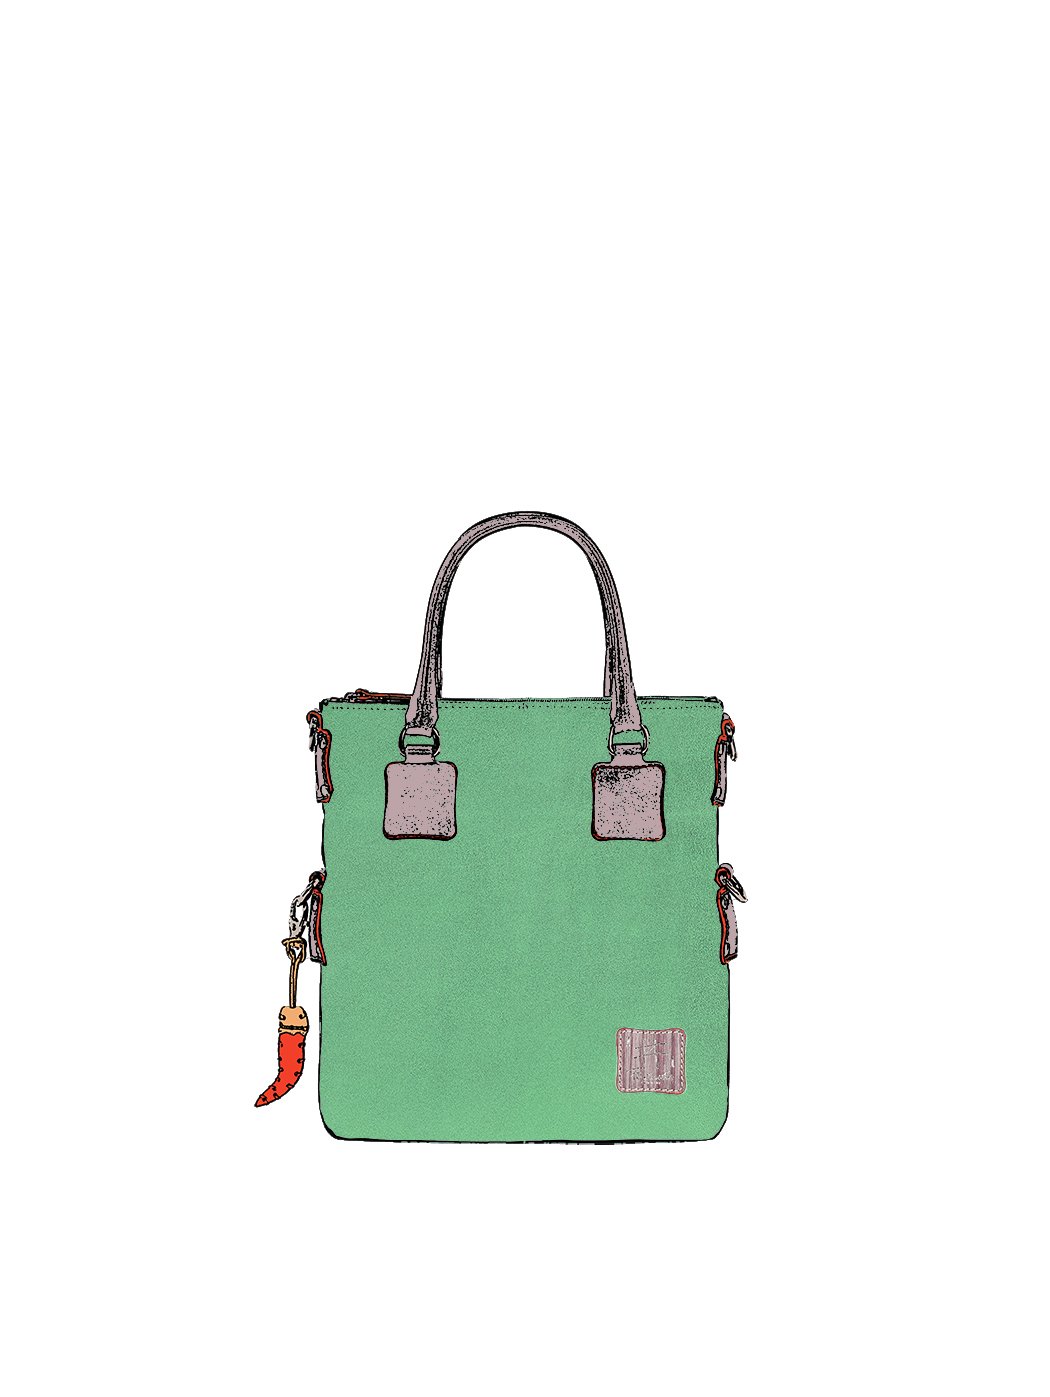 Small Tote Leather Bag in Light Green